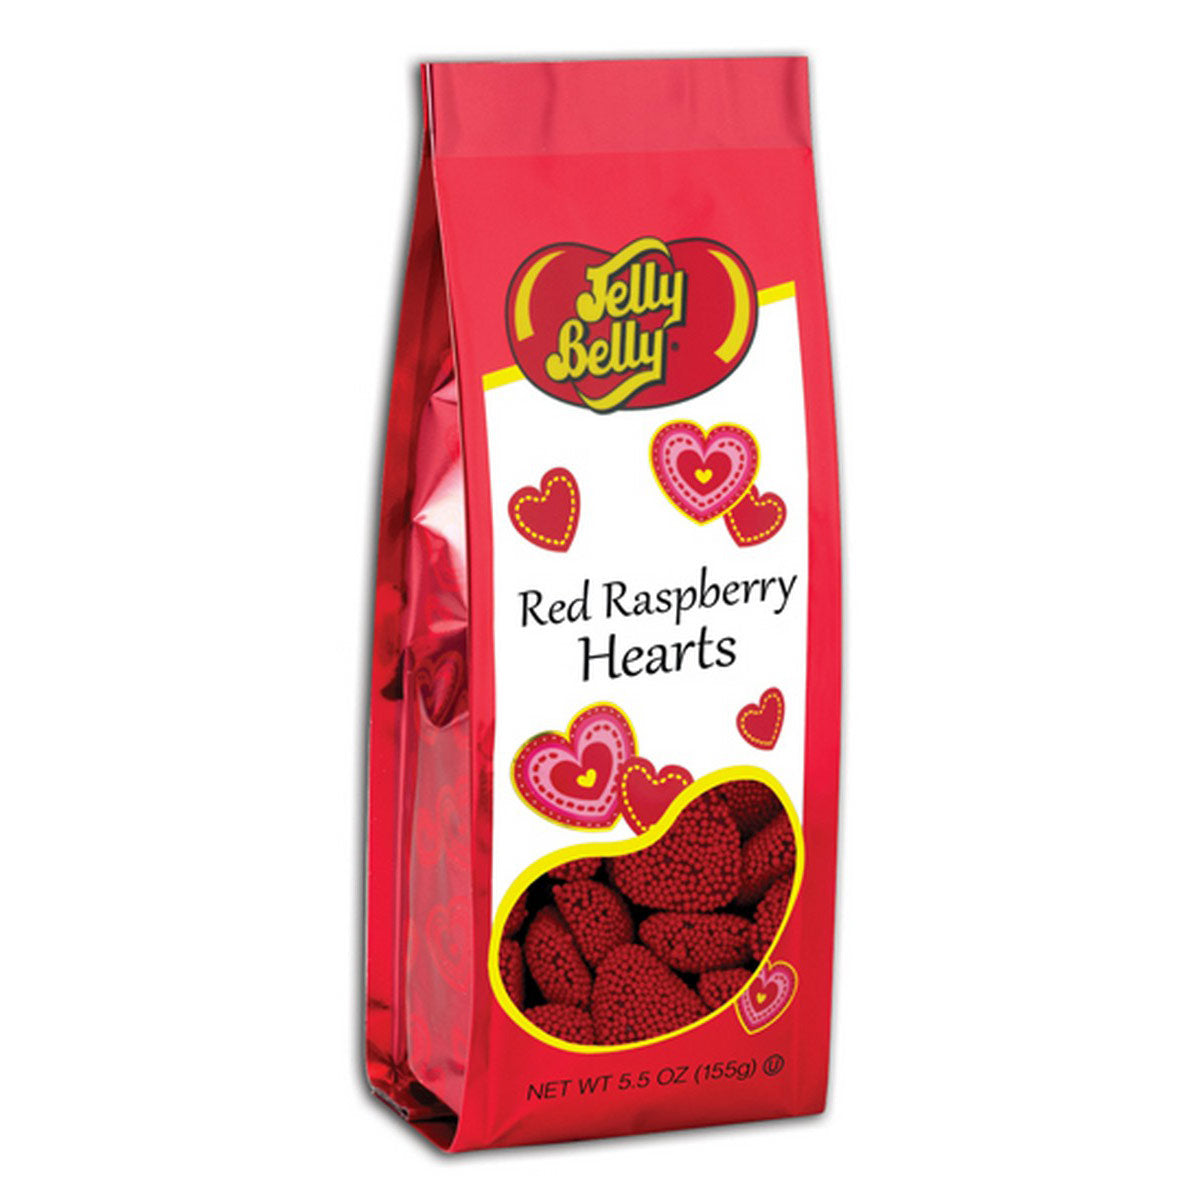 JELLY BELLY: Red Raspberry Hearts Gift Bag, 5.5 oz - Vending Business Solutions